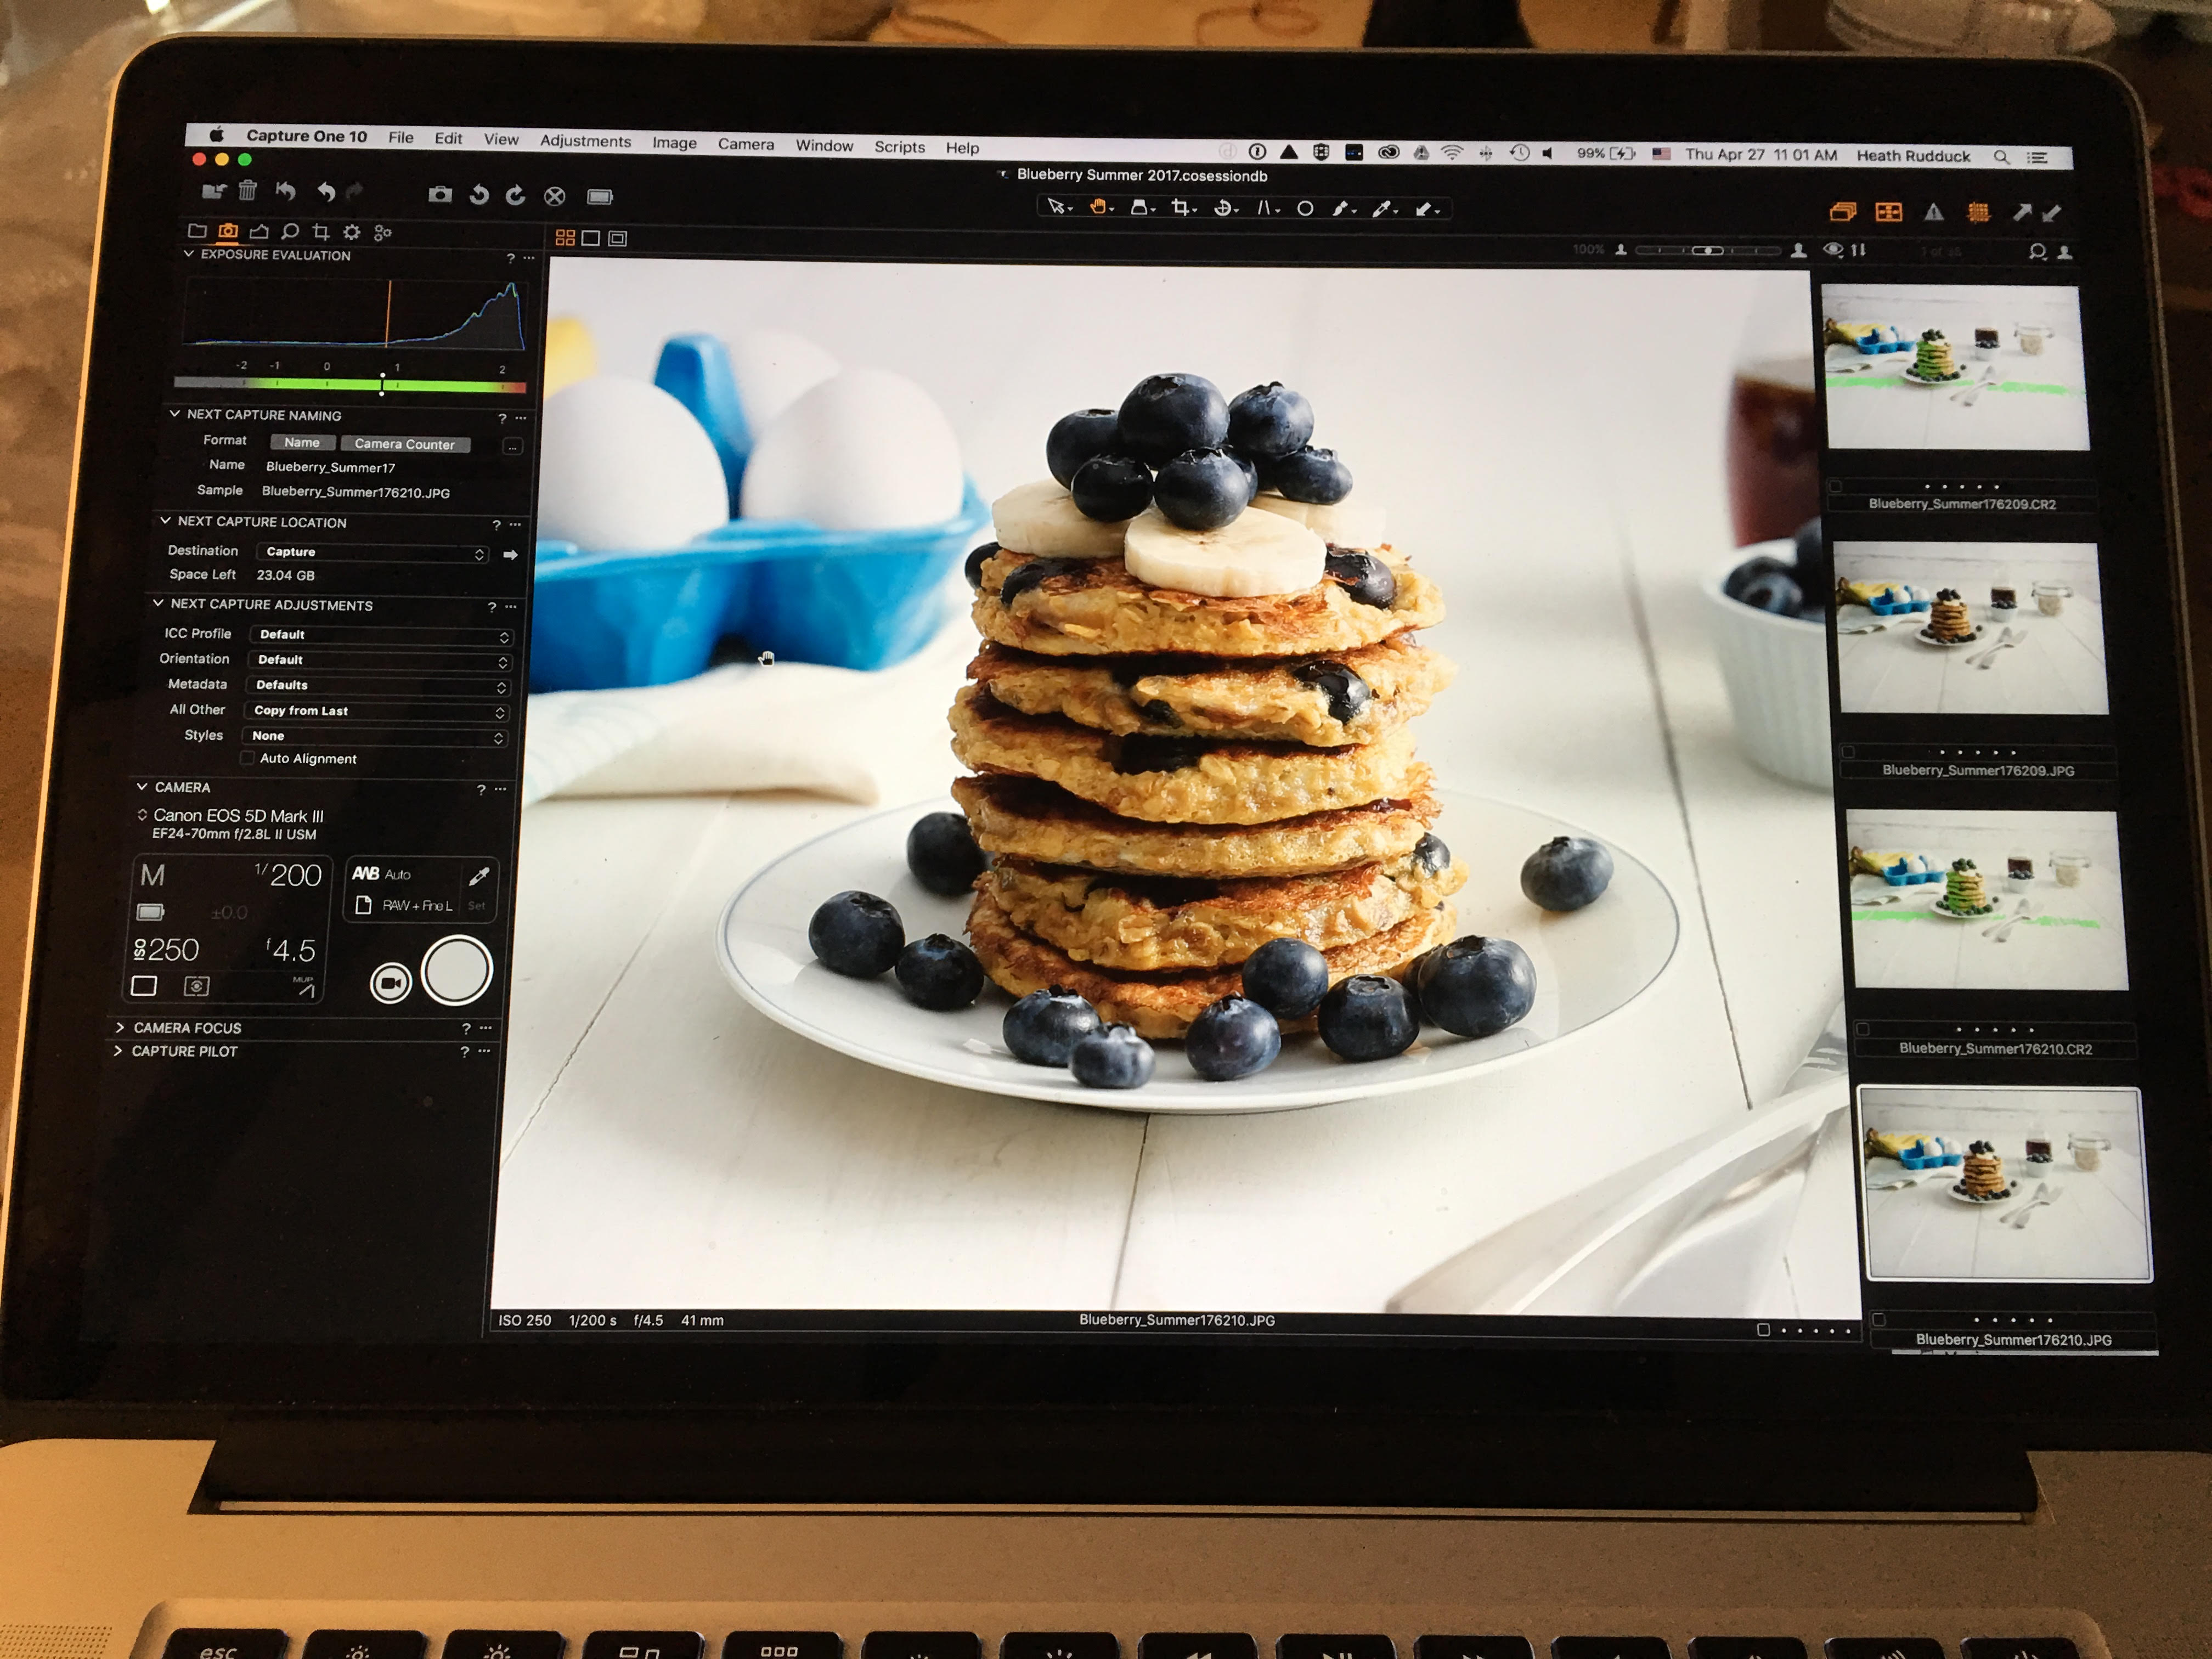 Gluten Free Blueberry Pancakes on the computer monitor at the photo shoot.